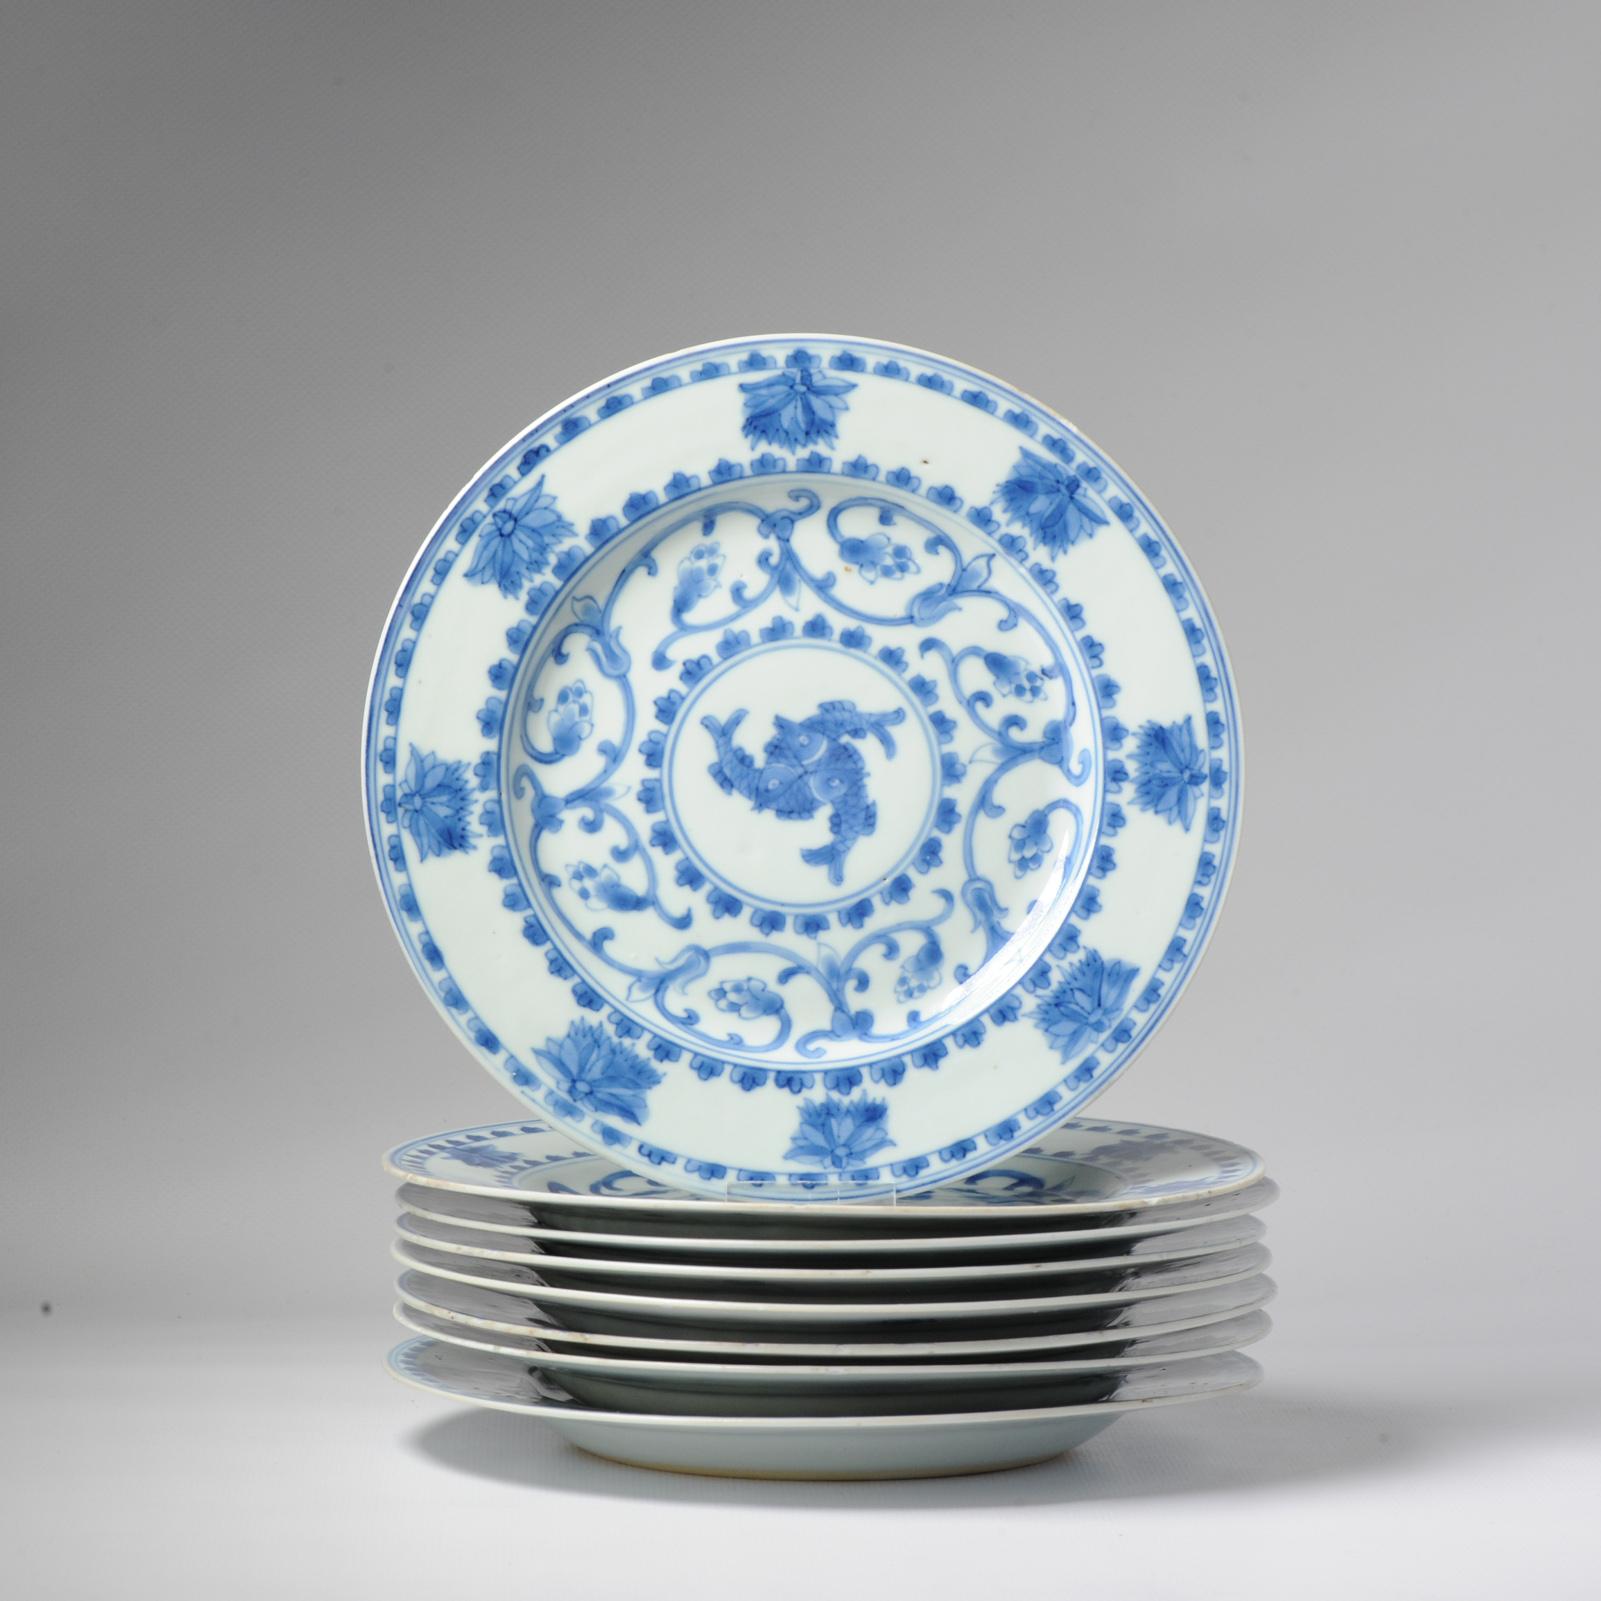 #8 Antique Chinese Porcelain 18th C Kangxi/Yongzheng Period Blue White Dinner In Good Condition For Sale In Amsterdam, Noord Holland